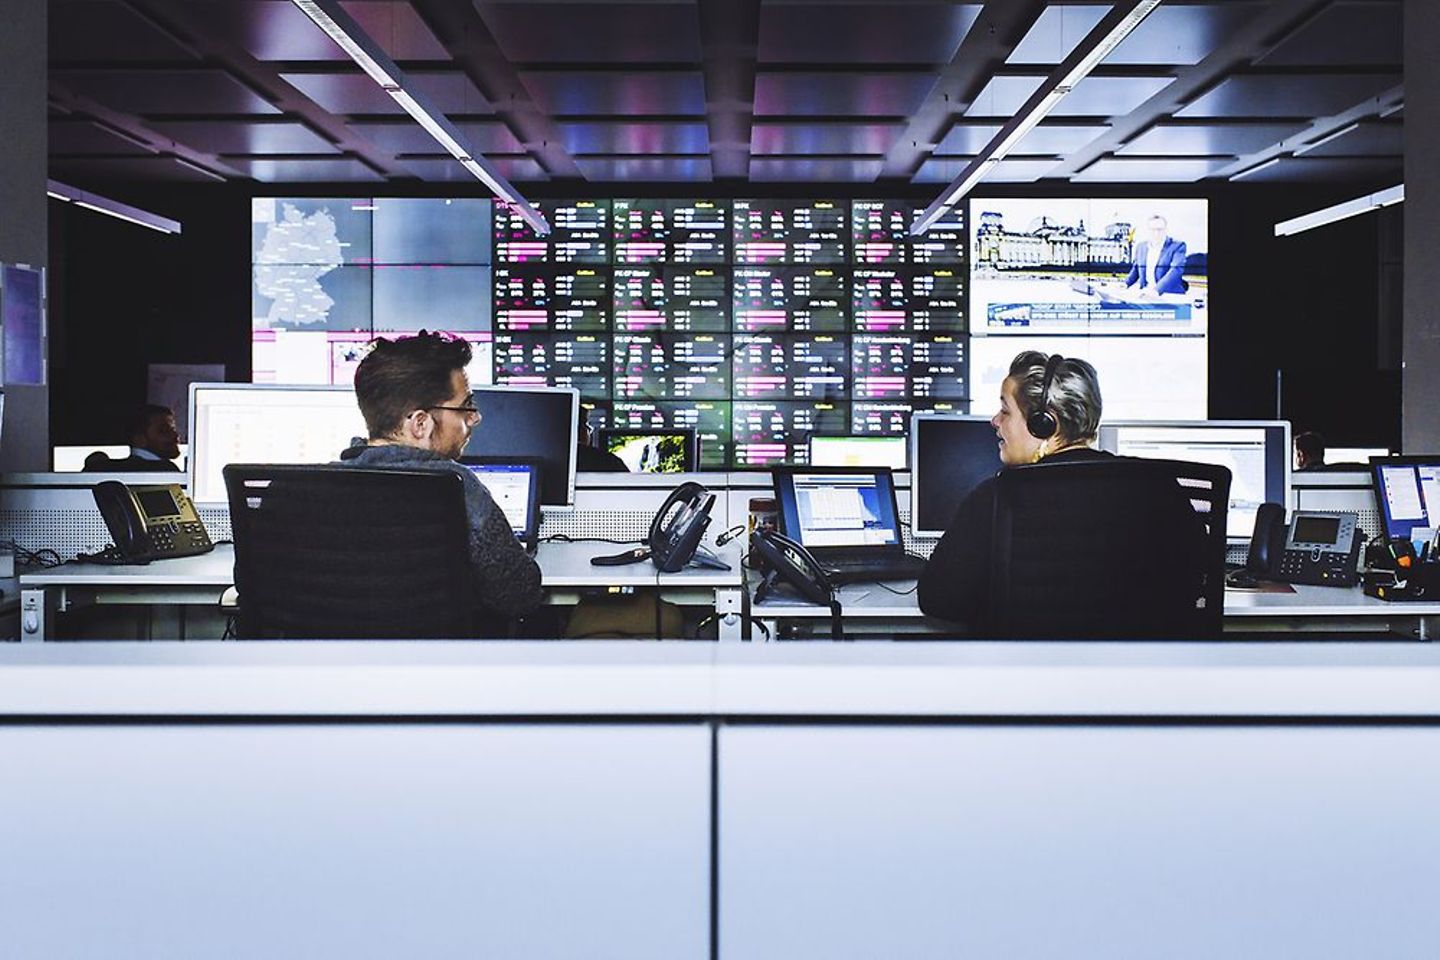 Two people sitting in a surveillance room in front of many monitors